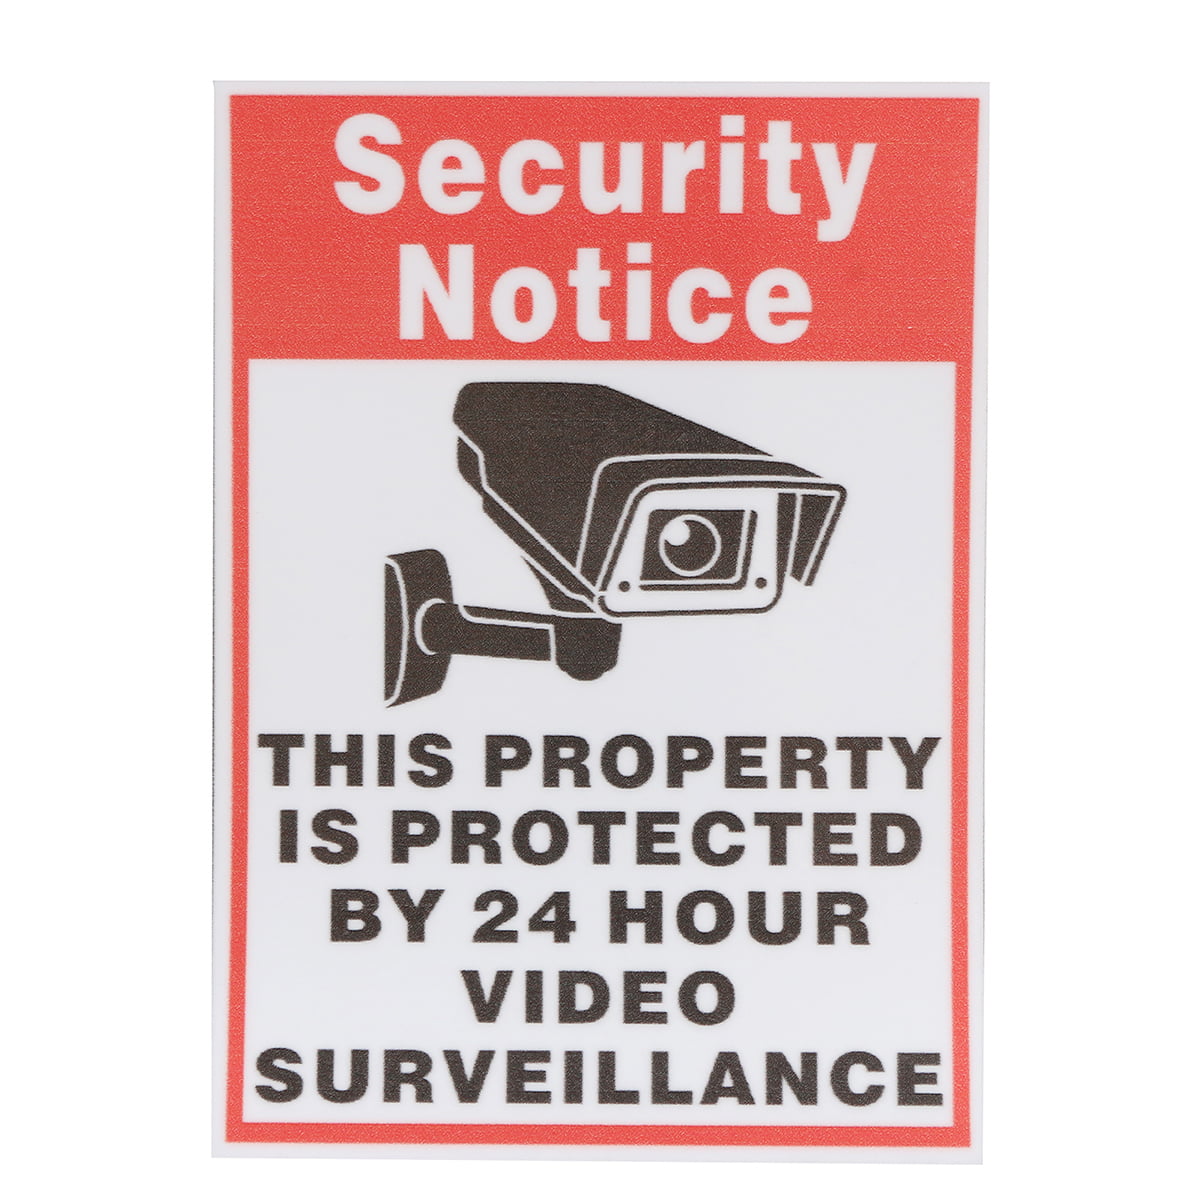 WARNING PREMISES PROTECTED CCTV 24 HOUR VIDEO RECORDING Super Tac Stickers x 4 